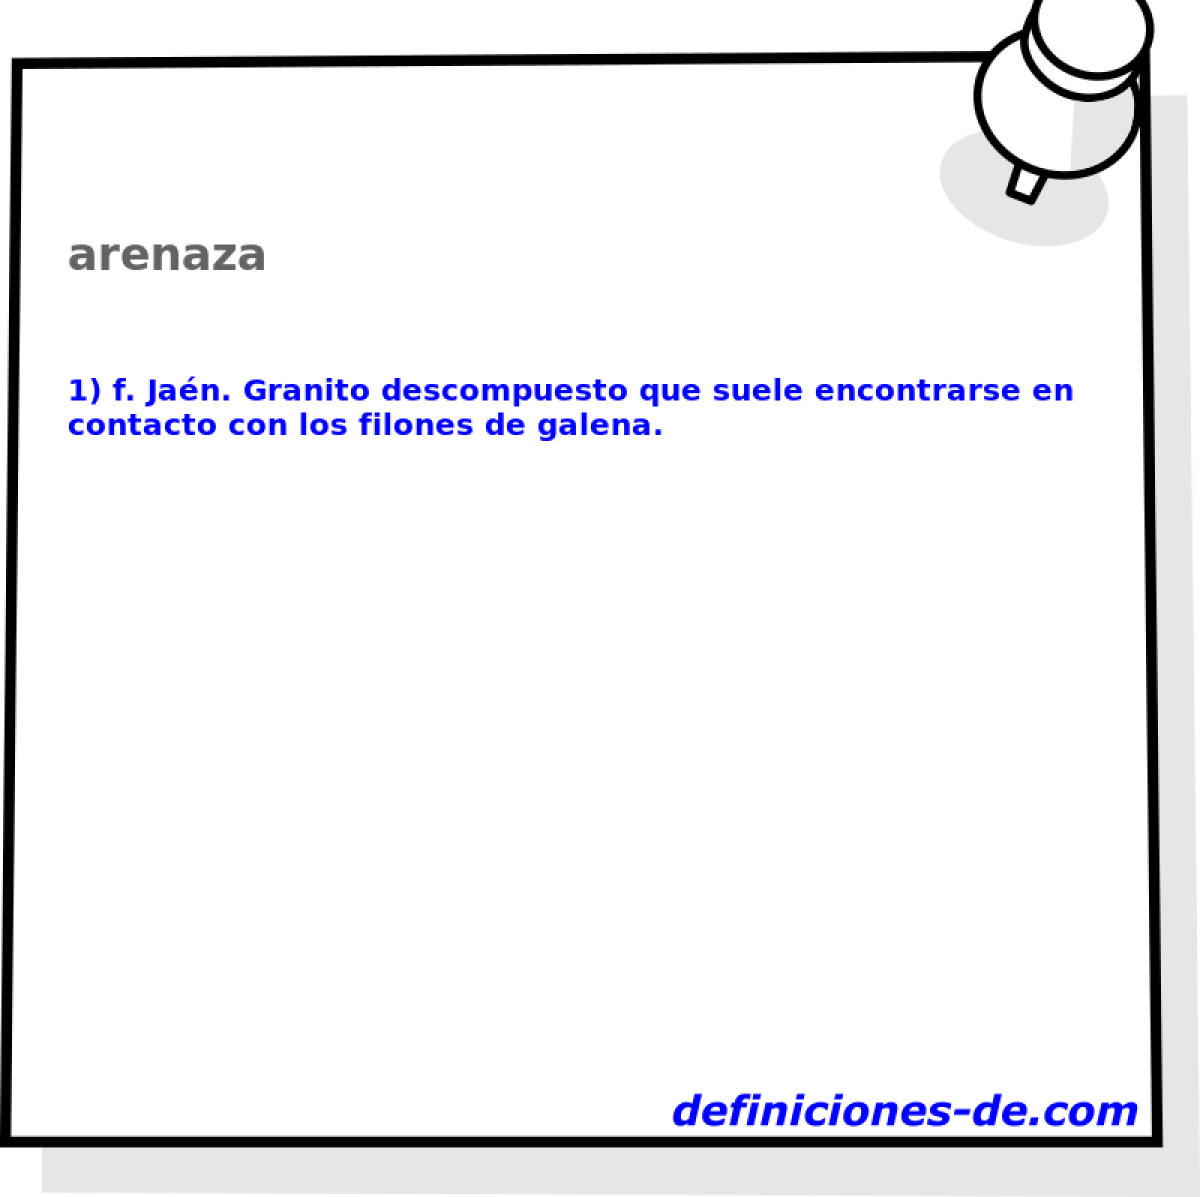 arenaza 